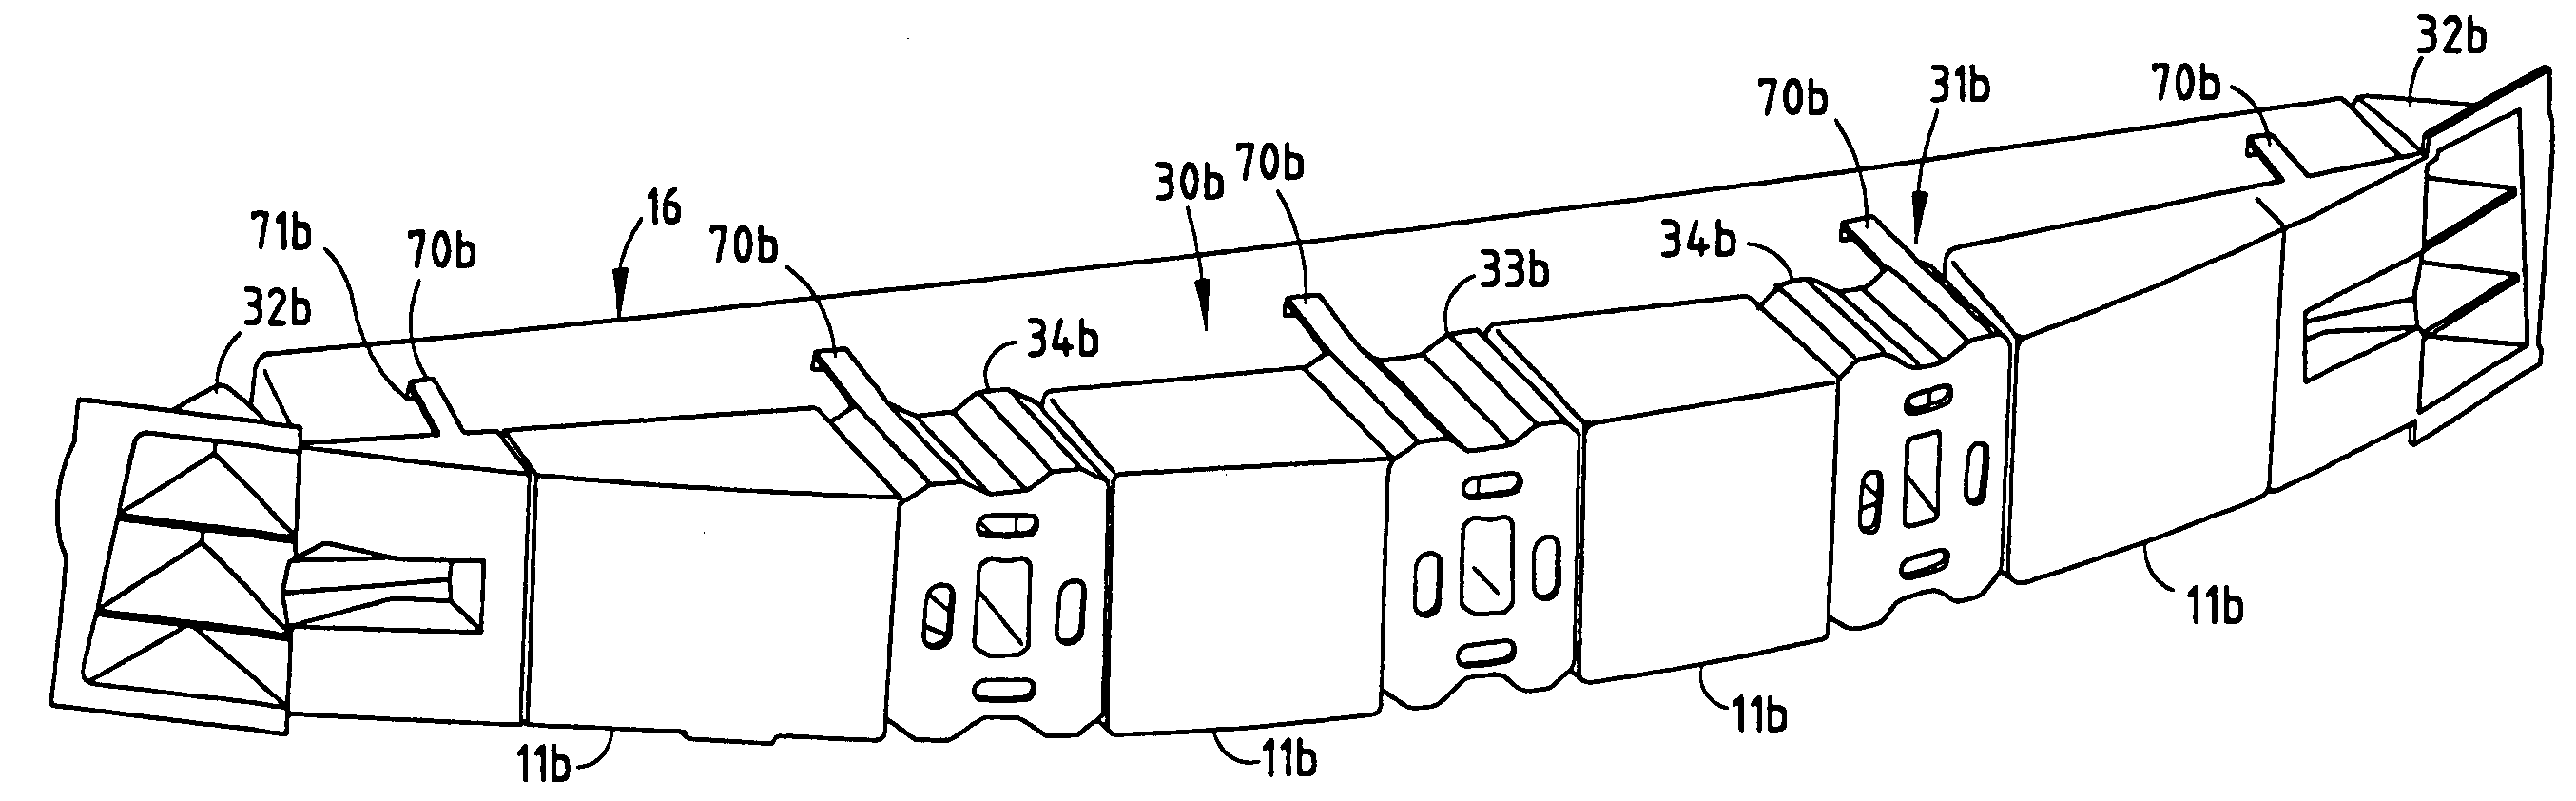 Bumper system with energy absorber